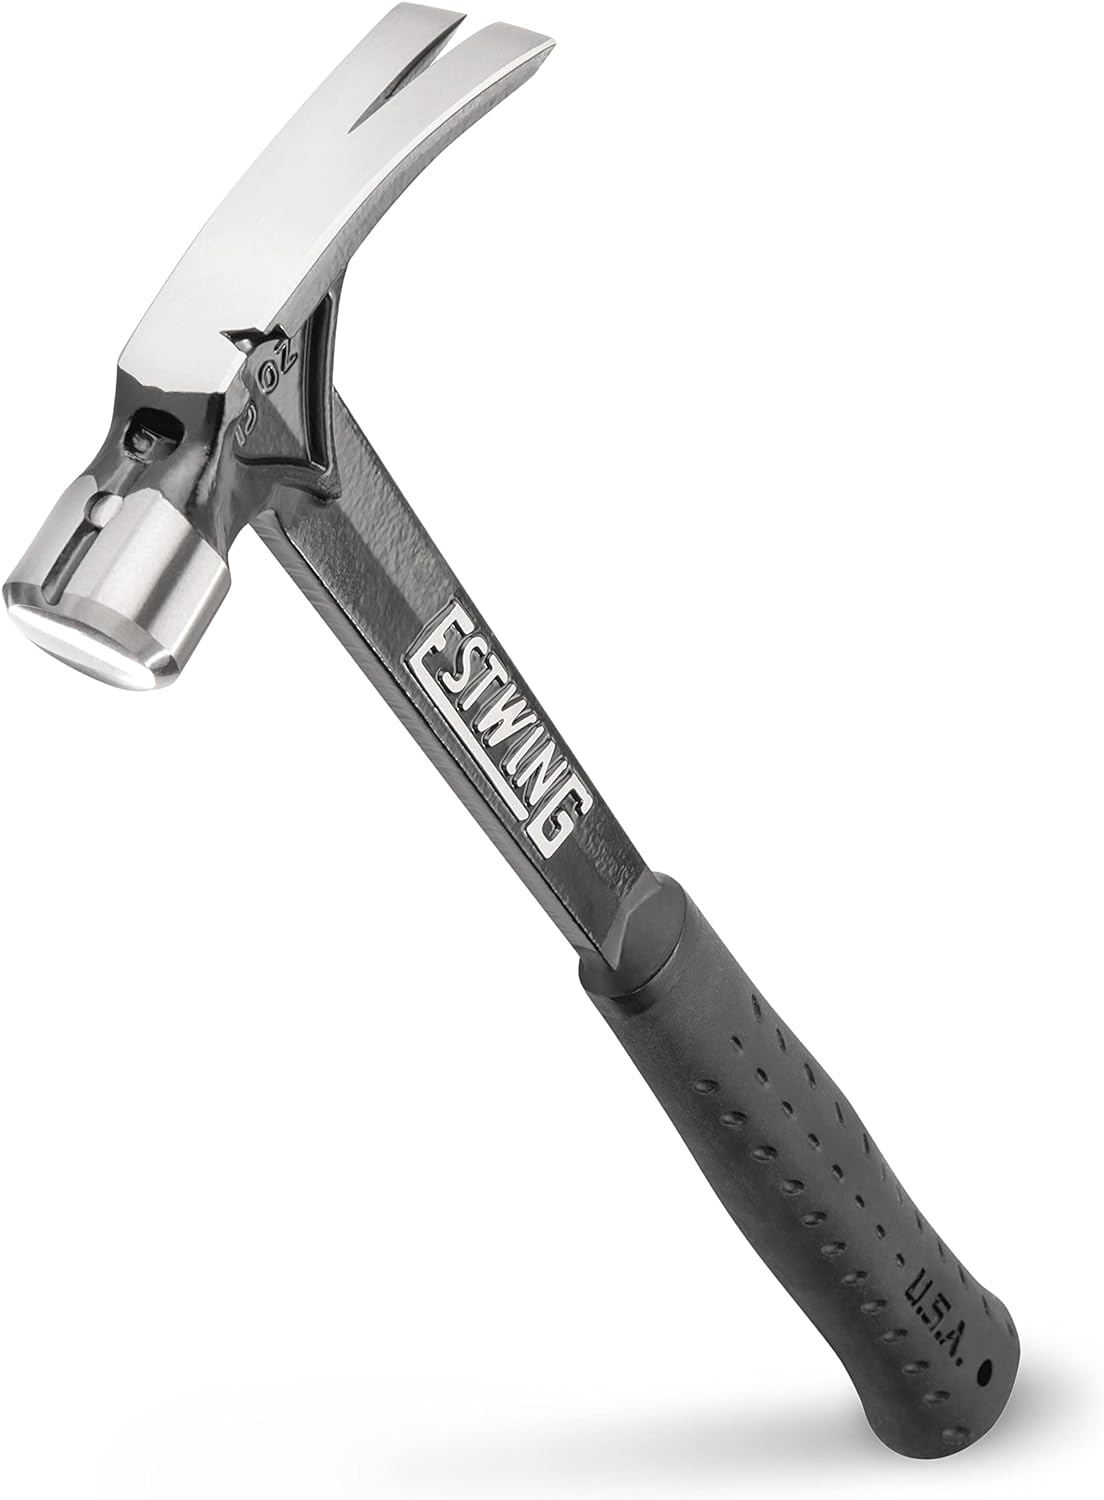 https://bigbigmart.com/wp-content/uploads/2023/10/ESTWING-Ultra-Series-Hammer-15-oz-Rip-Claw-Framer-with-Smooth-Face-Shock-Reduction-Grip-EB-15S.jpg